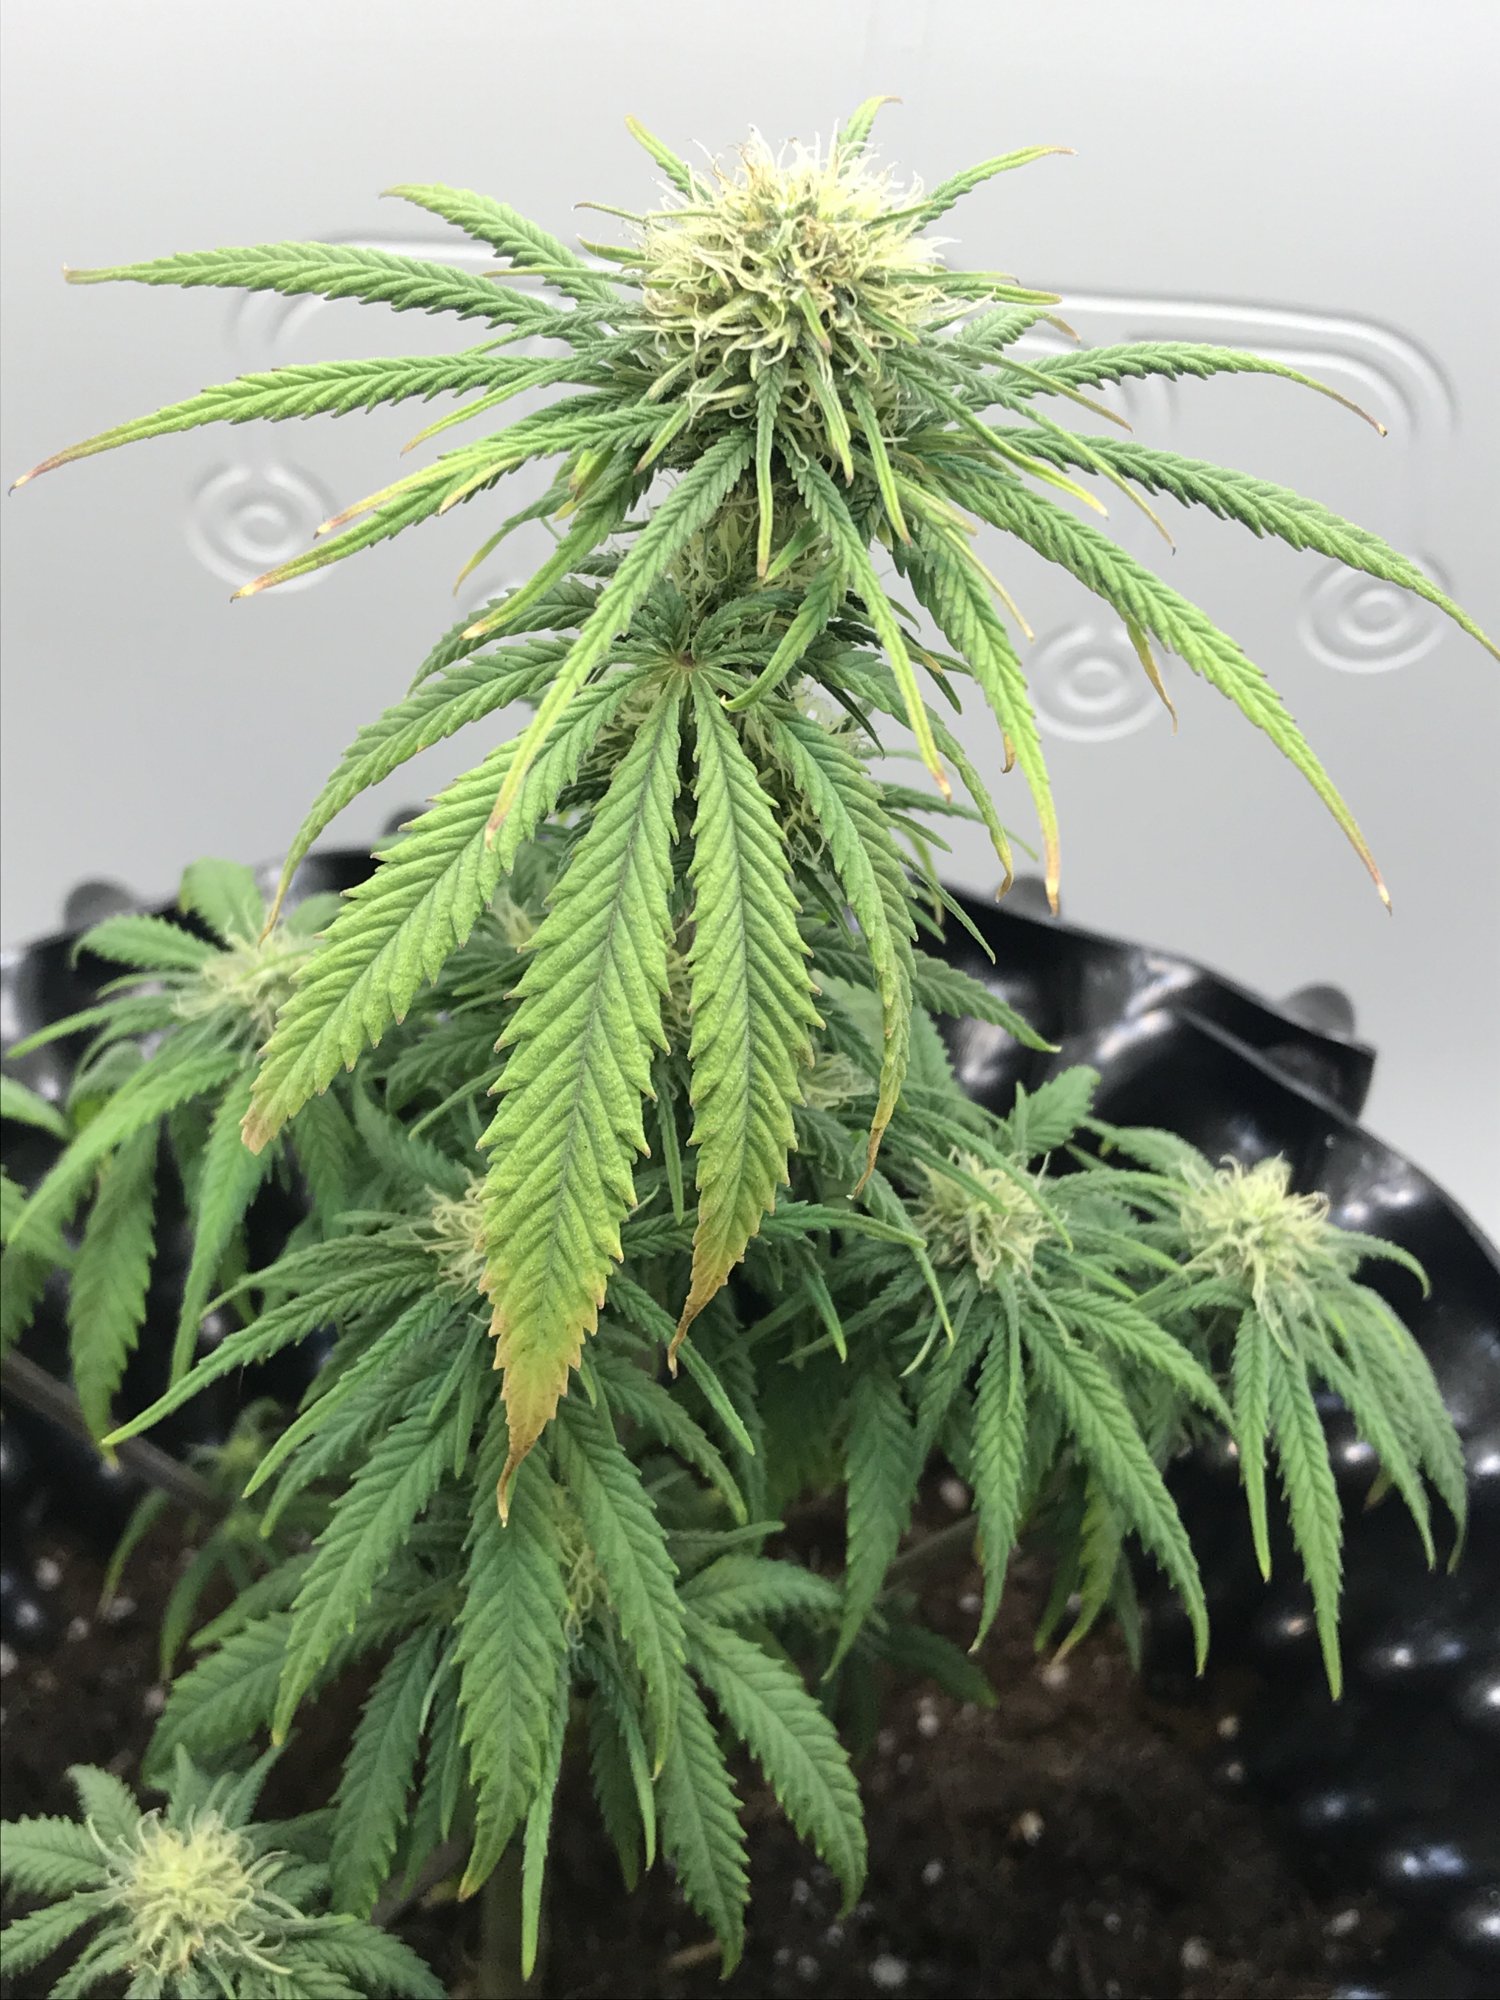 Is this a root issue nute deficiency or something else 5